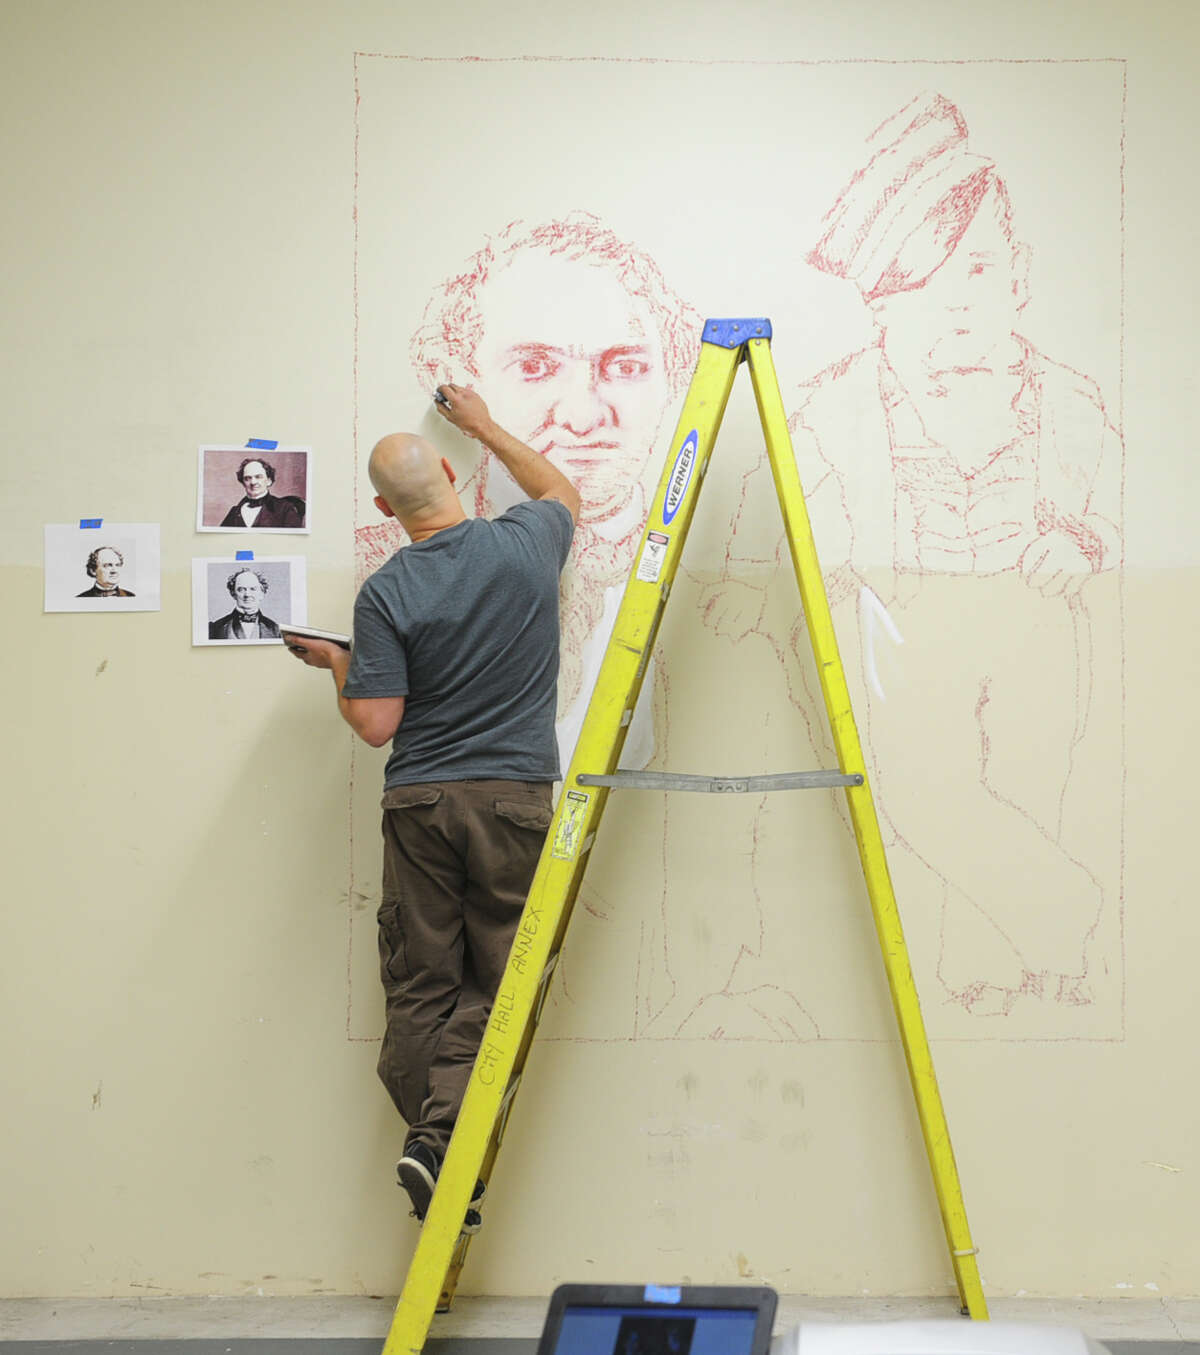 New York artist Roberto Martinez works on a stamp mural of P.T. Barnum and Tom Thumb in the former Probate CourtâÄôs vault Tuesday, Oct. 29, 2013 at McLevy Hall in downtown Bridgeport, Conn. The historic building will become a new home for artists beginning on Nov. 7 thanks to a state-city grant-funded partnership that will provide space for artists to create and sell their artwork from inside the building.